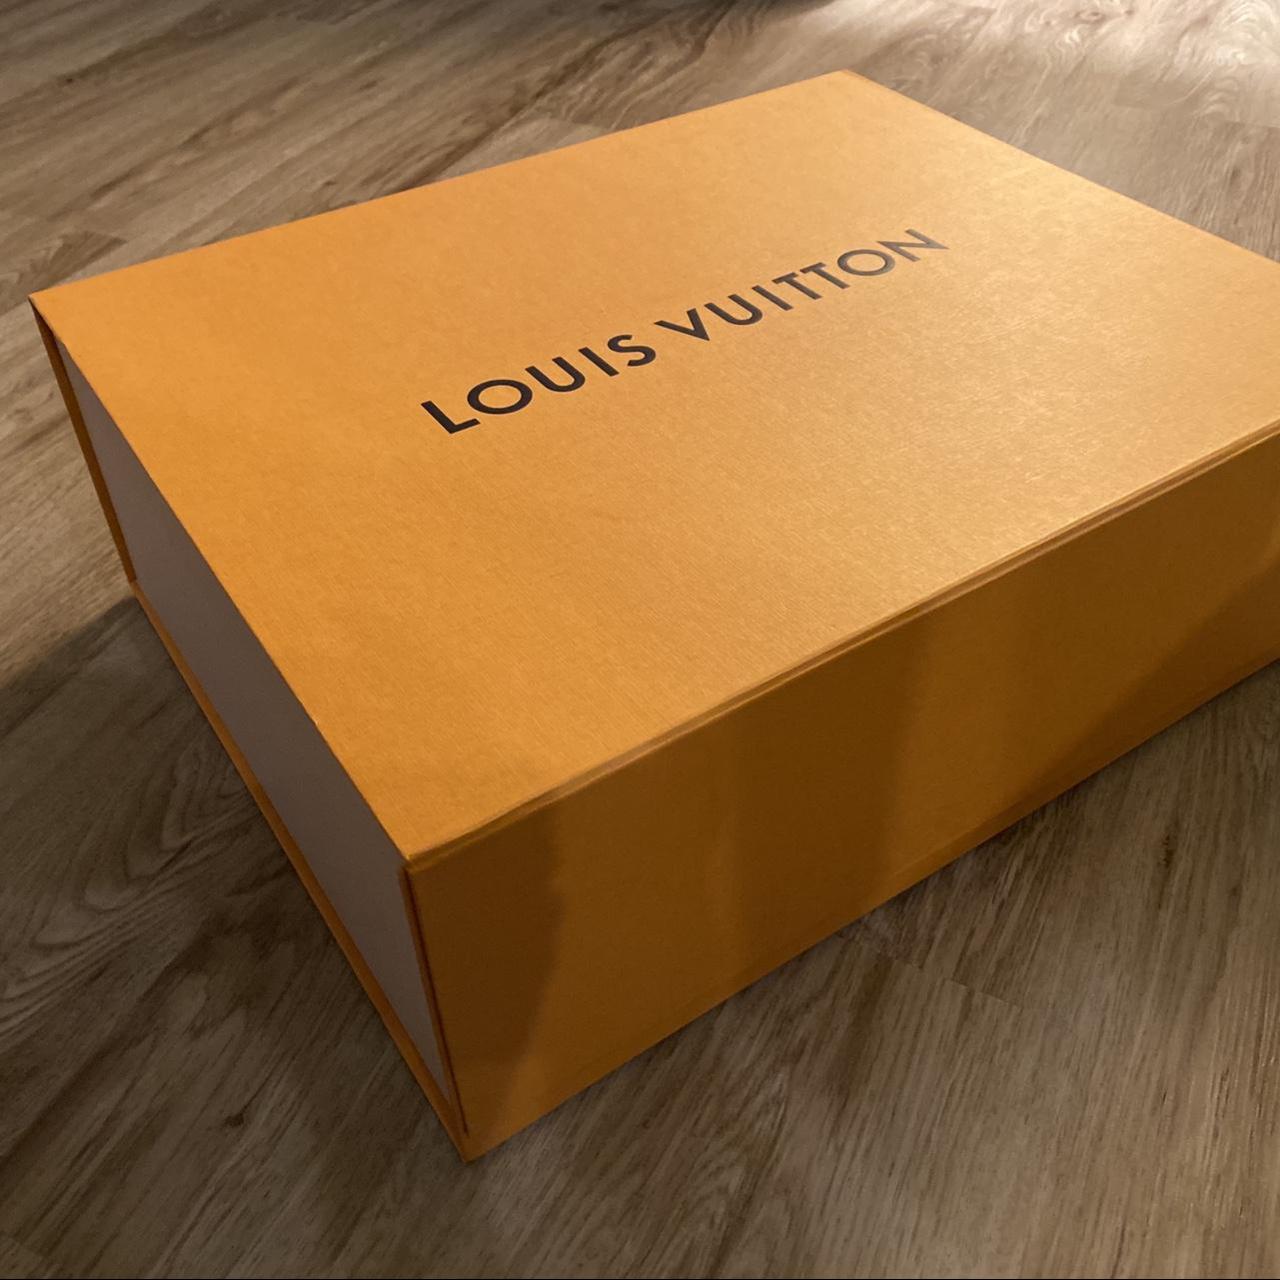 Authentic Louis Vuitton Magnetic Packing Box  Authentic louis vuitton, Louis  vuitton, Vuitton